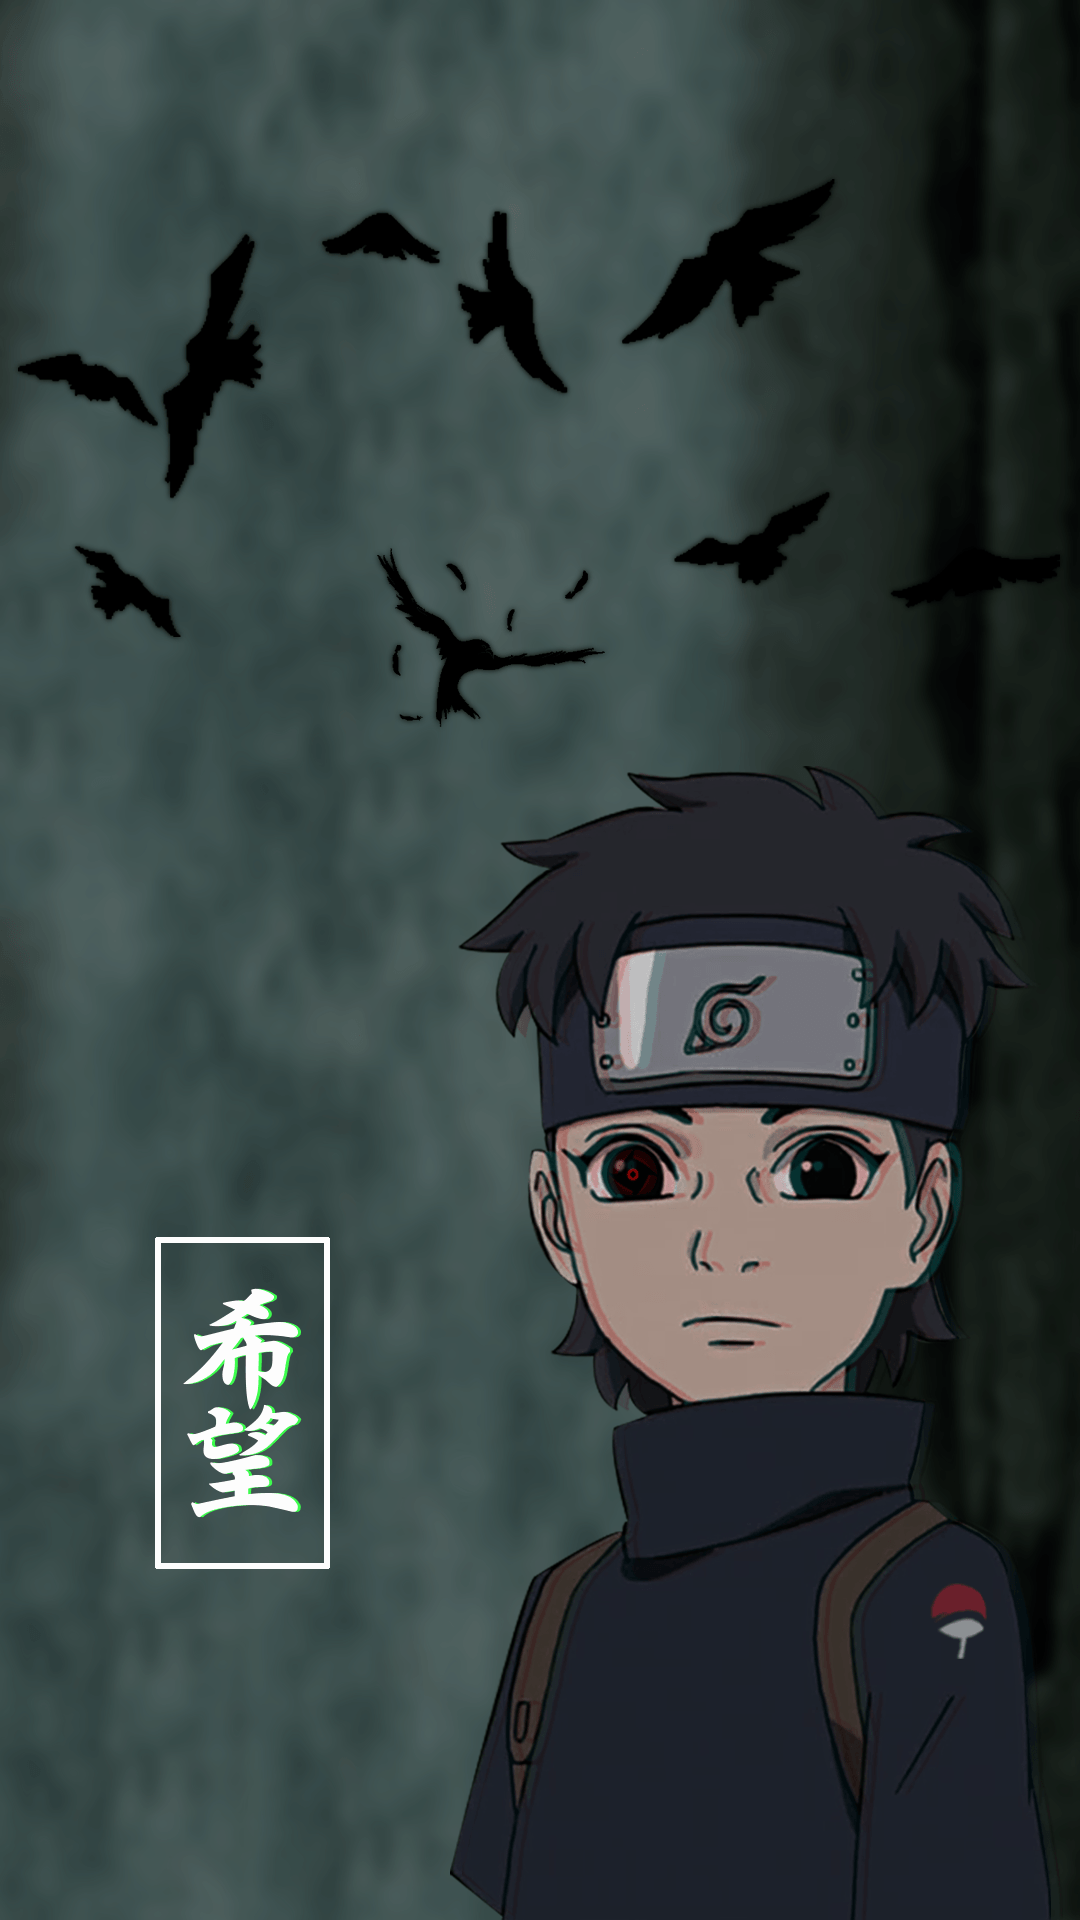 Took a while but here's a Shisui wallpaper. Naruto shippuden